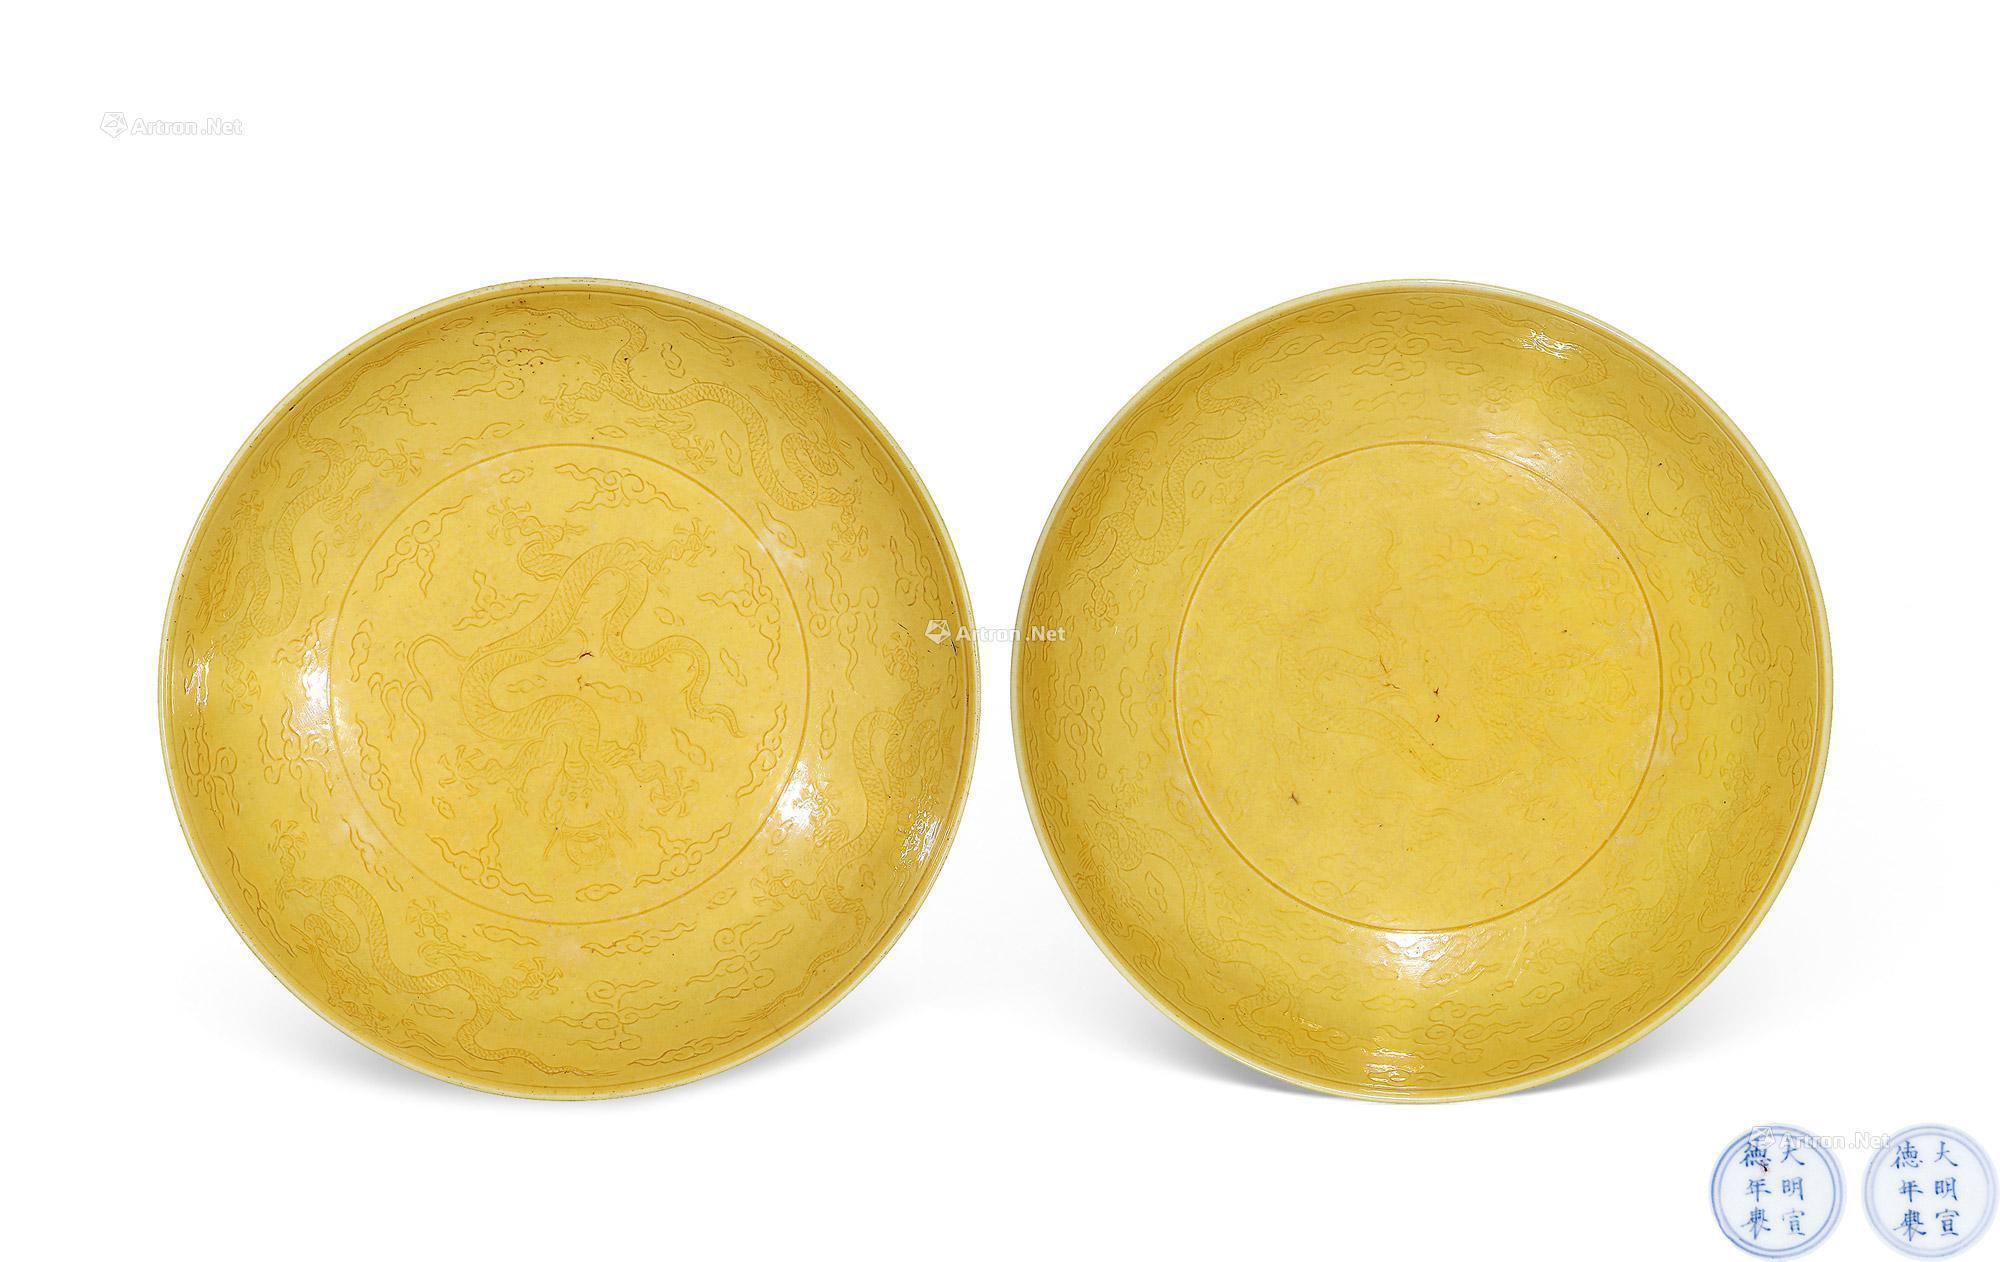 A PAIR OF YELLOW GLAZED PLATES WITH ENGRAVED DRAGONS